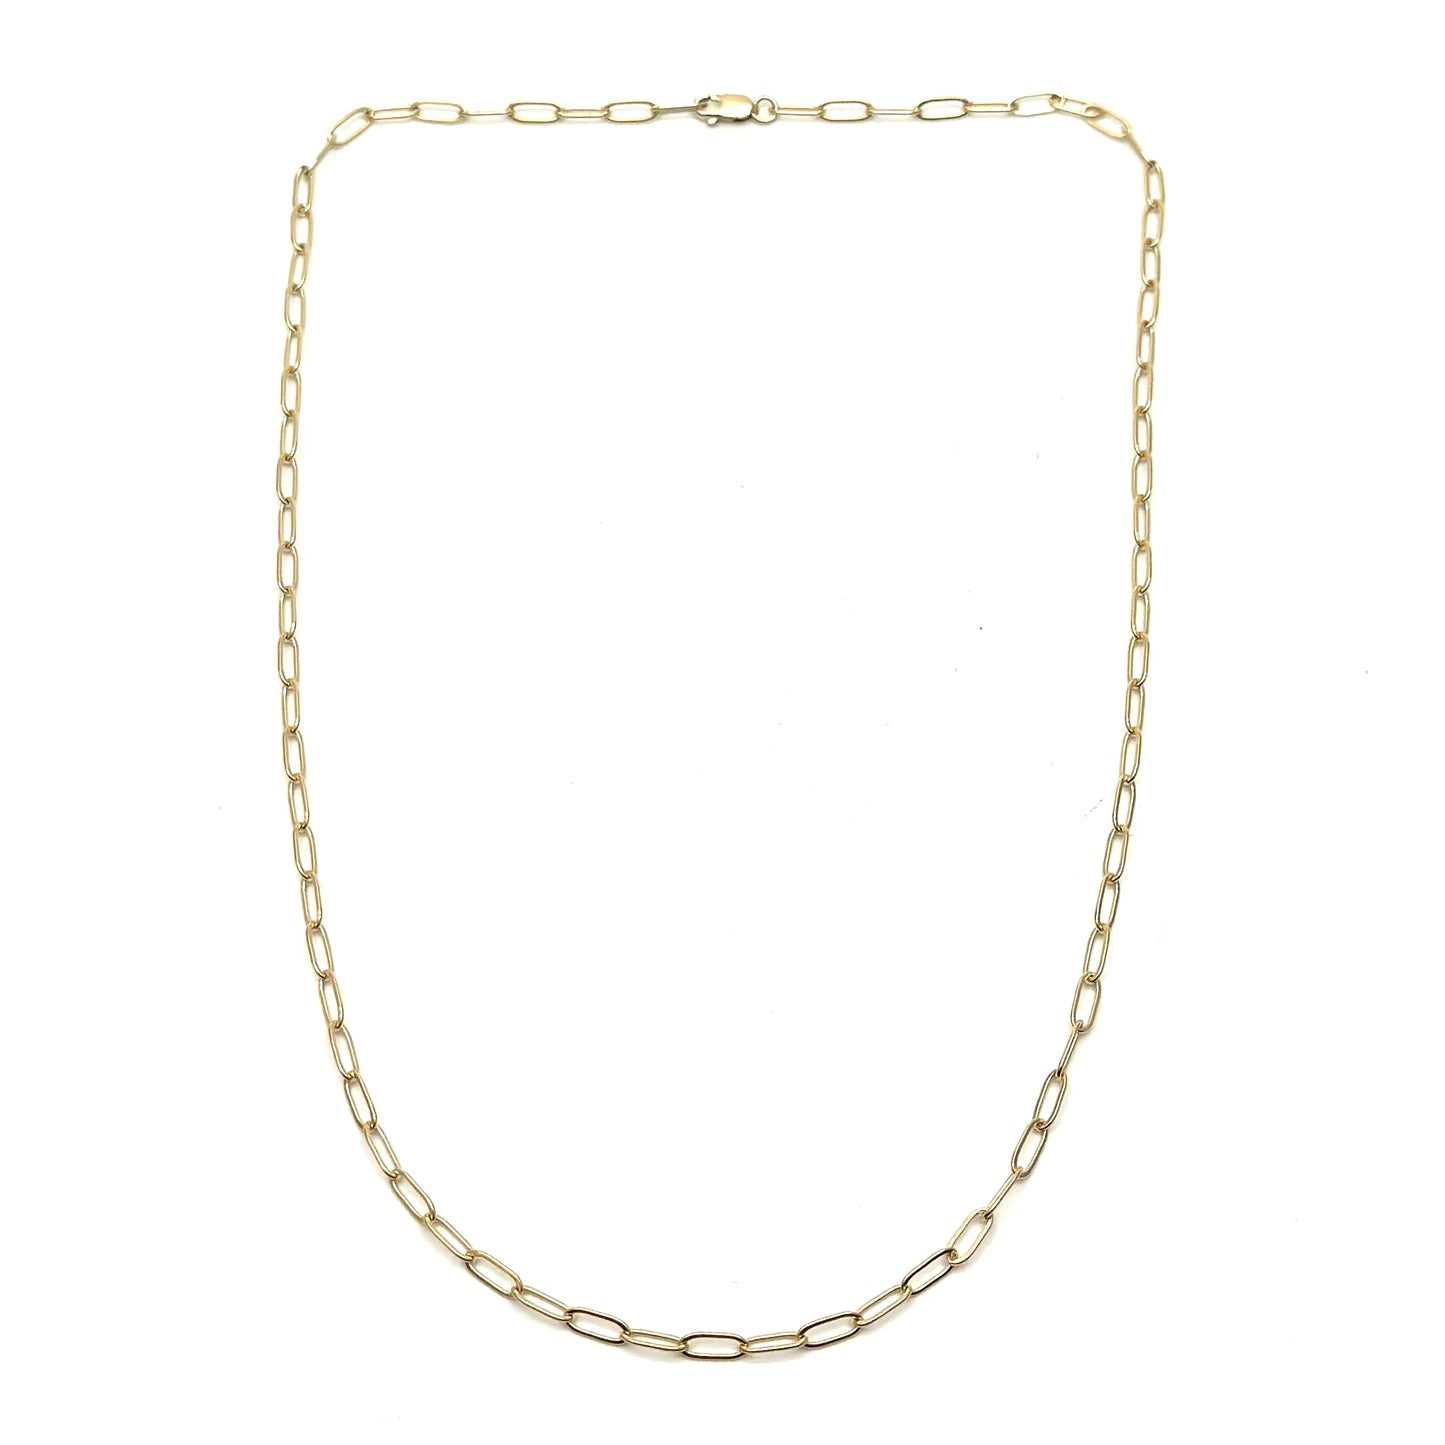 Load image into Gallery viewer, Gold Paperclip Necklace
